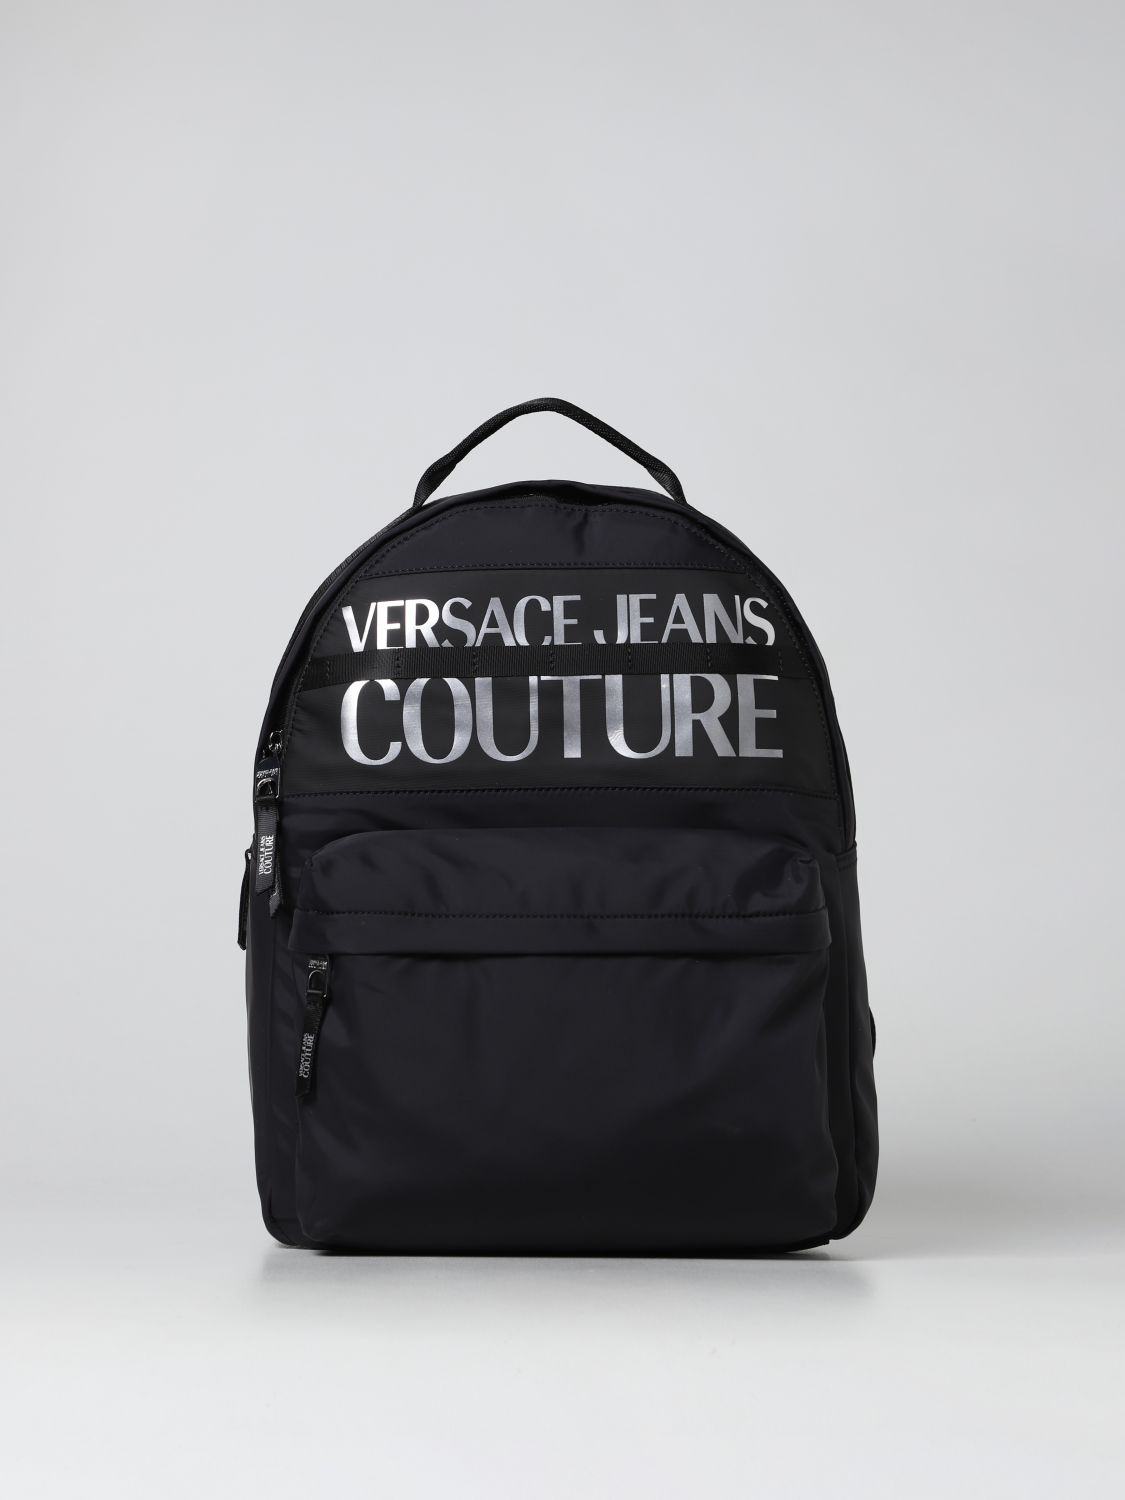 Backpack Versace Jeans Couture: Versace Jeans Couture backpack for man black 1 1